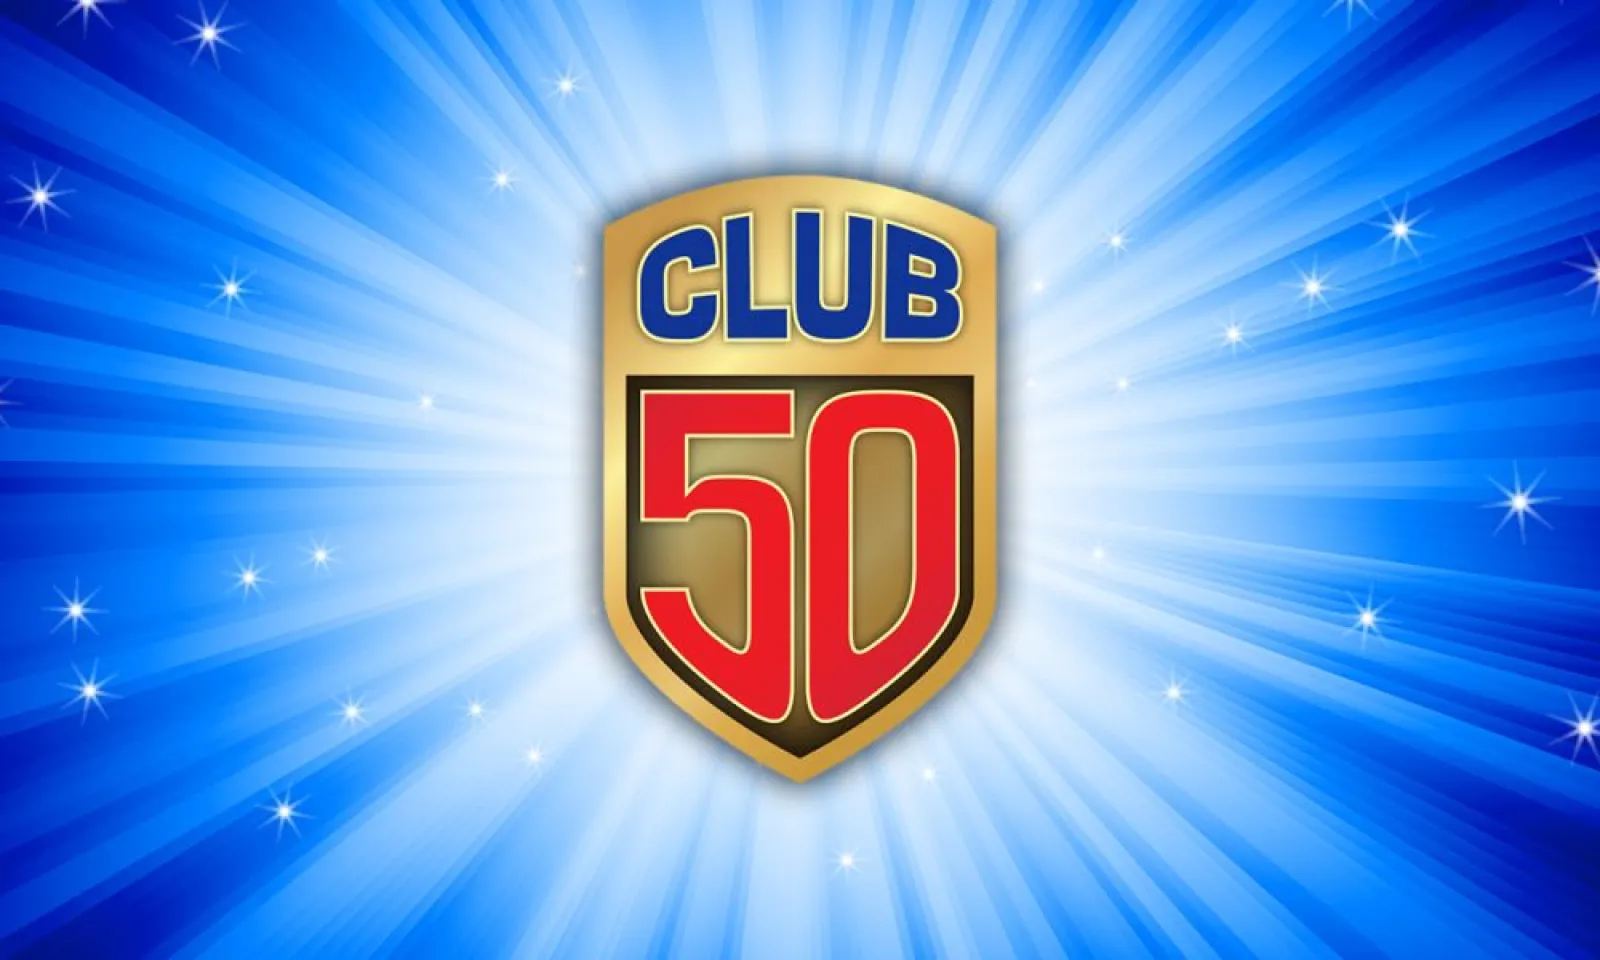 Club 50 logo over a blue starry background